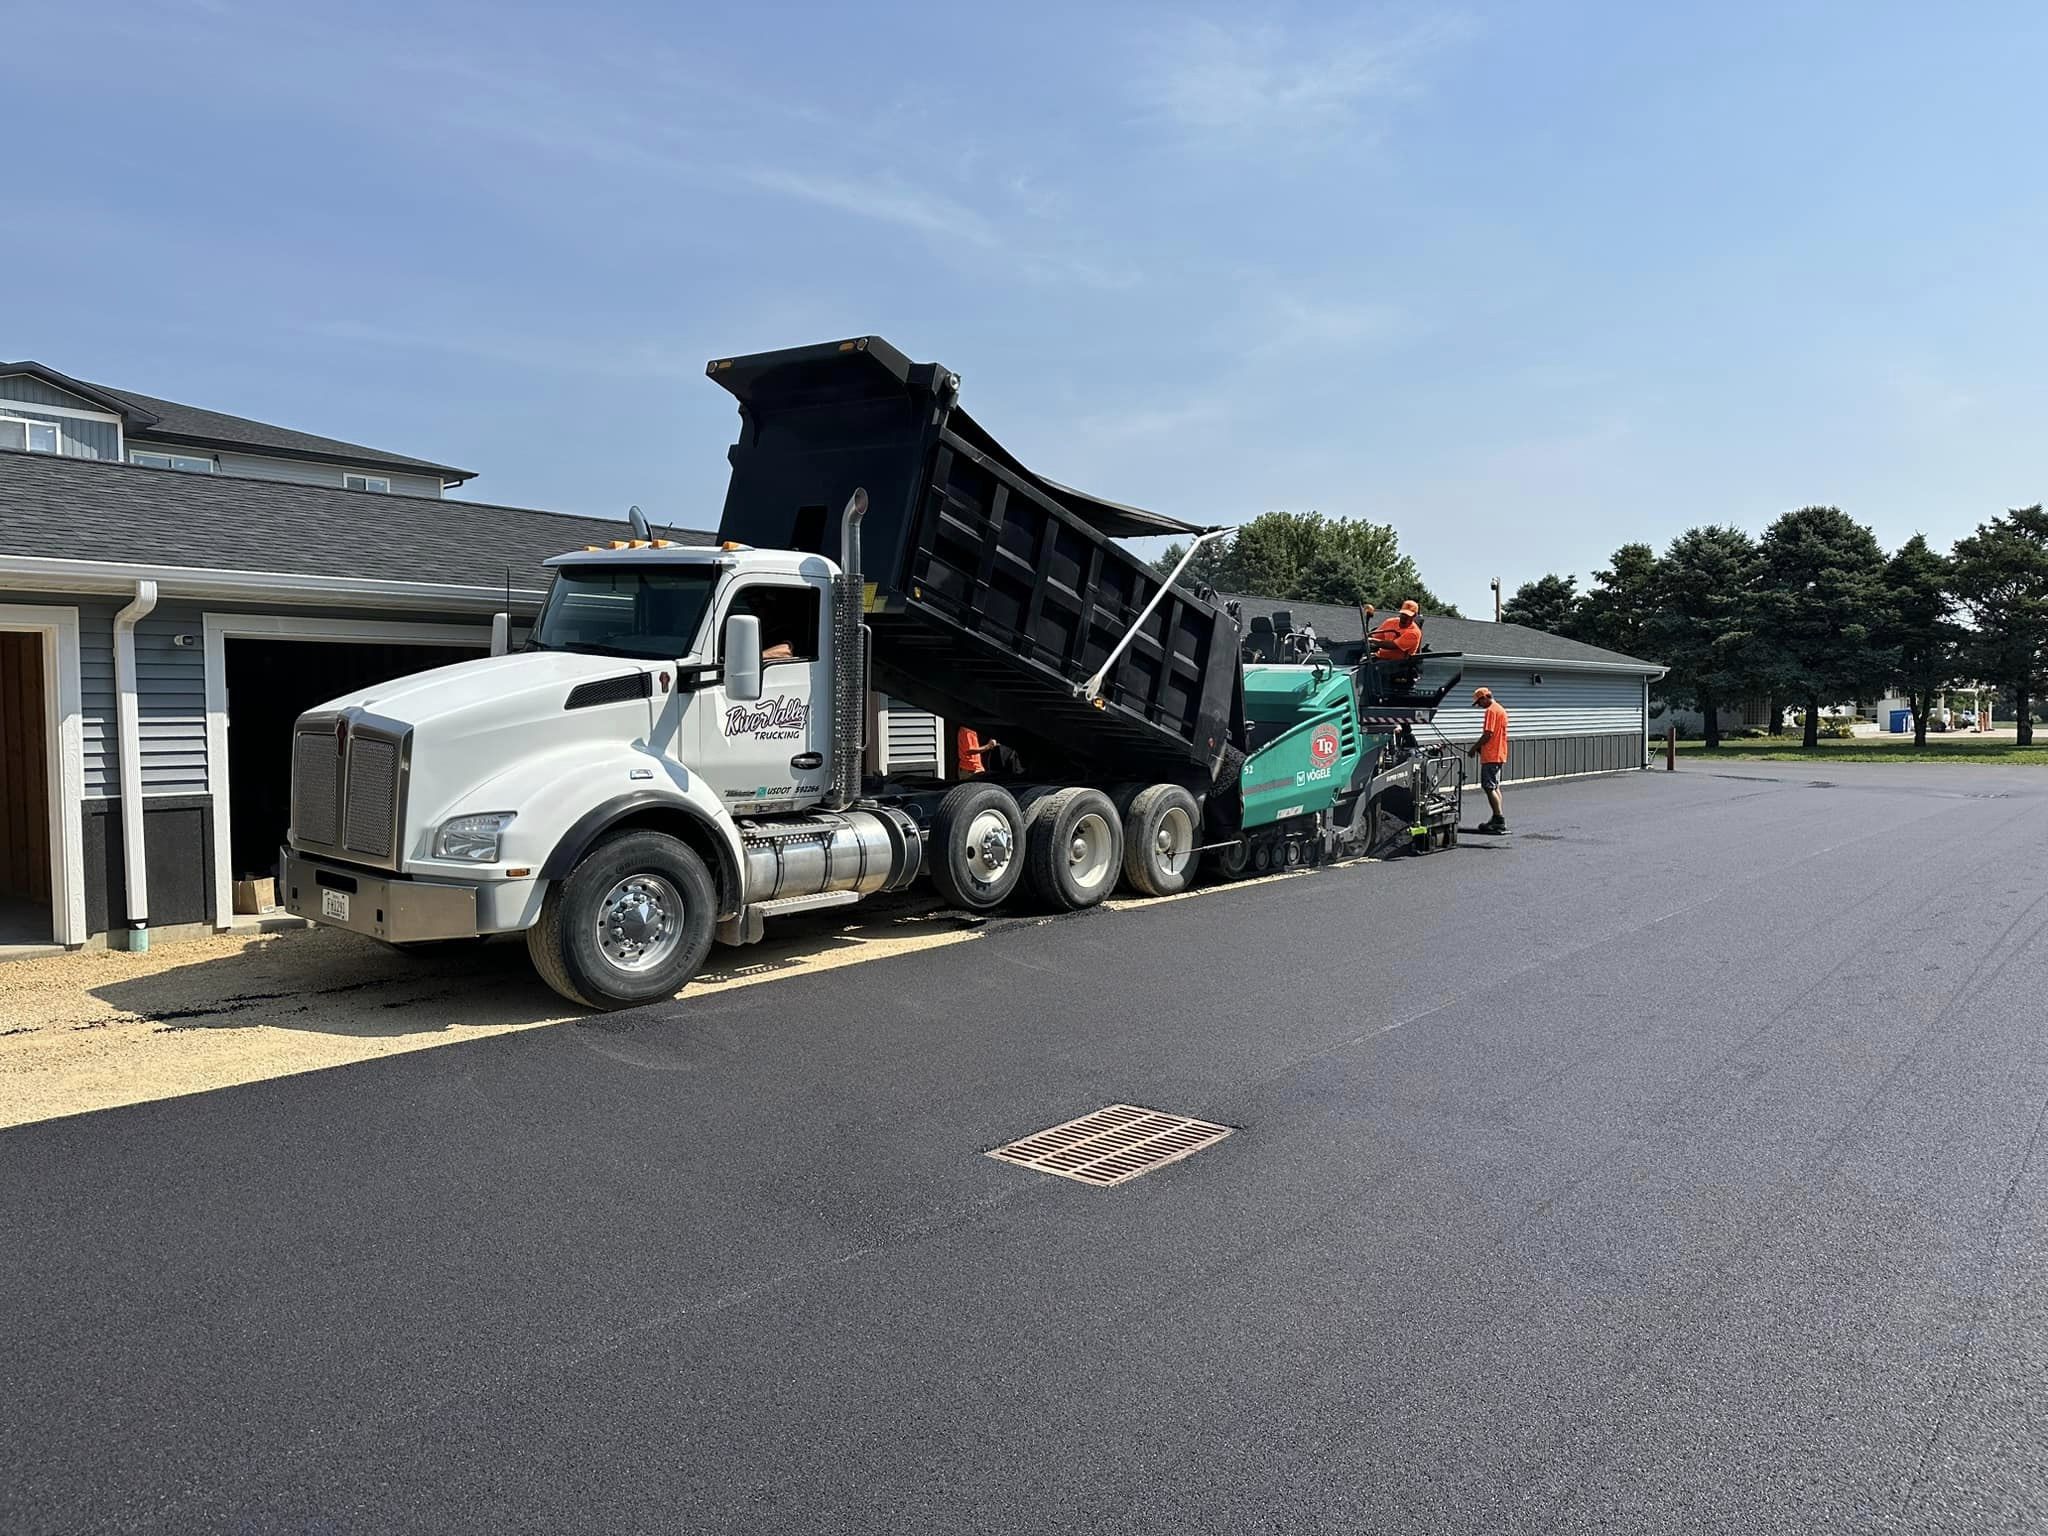 Taylor Ridge Paving & Construction - Asphalt, Sealing, Milling, Quad Cities Paving 602 2nd St W, Andalusia Illinois 61232